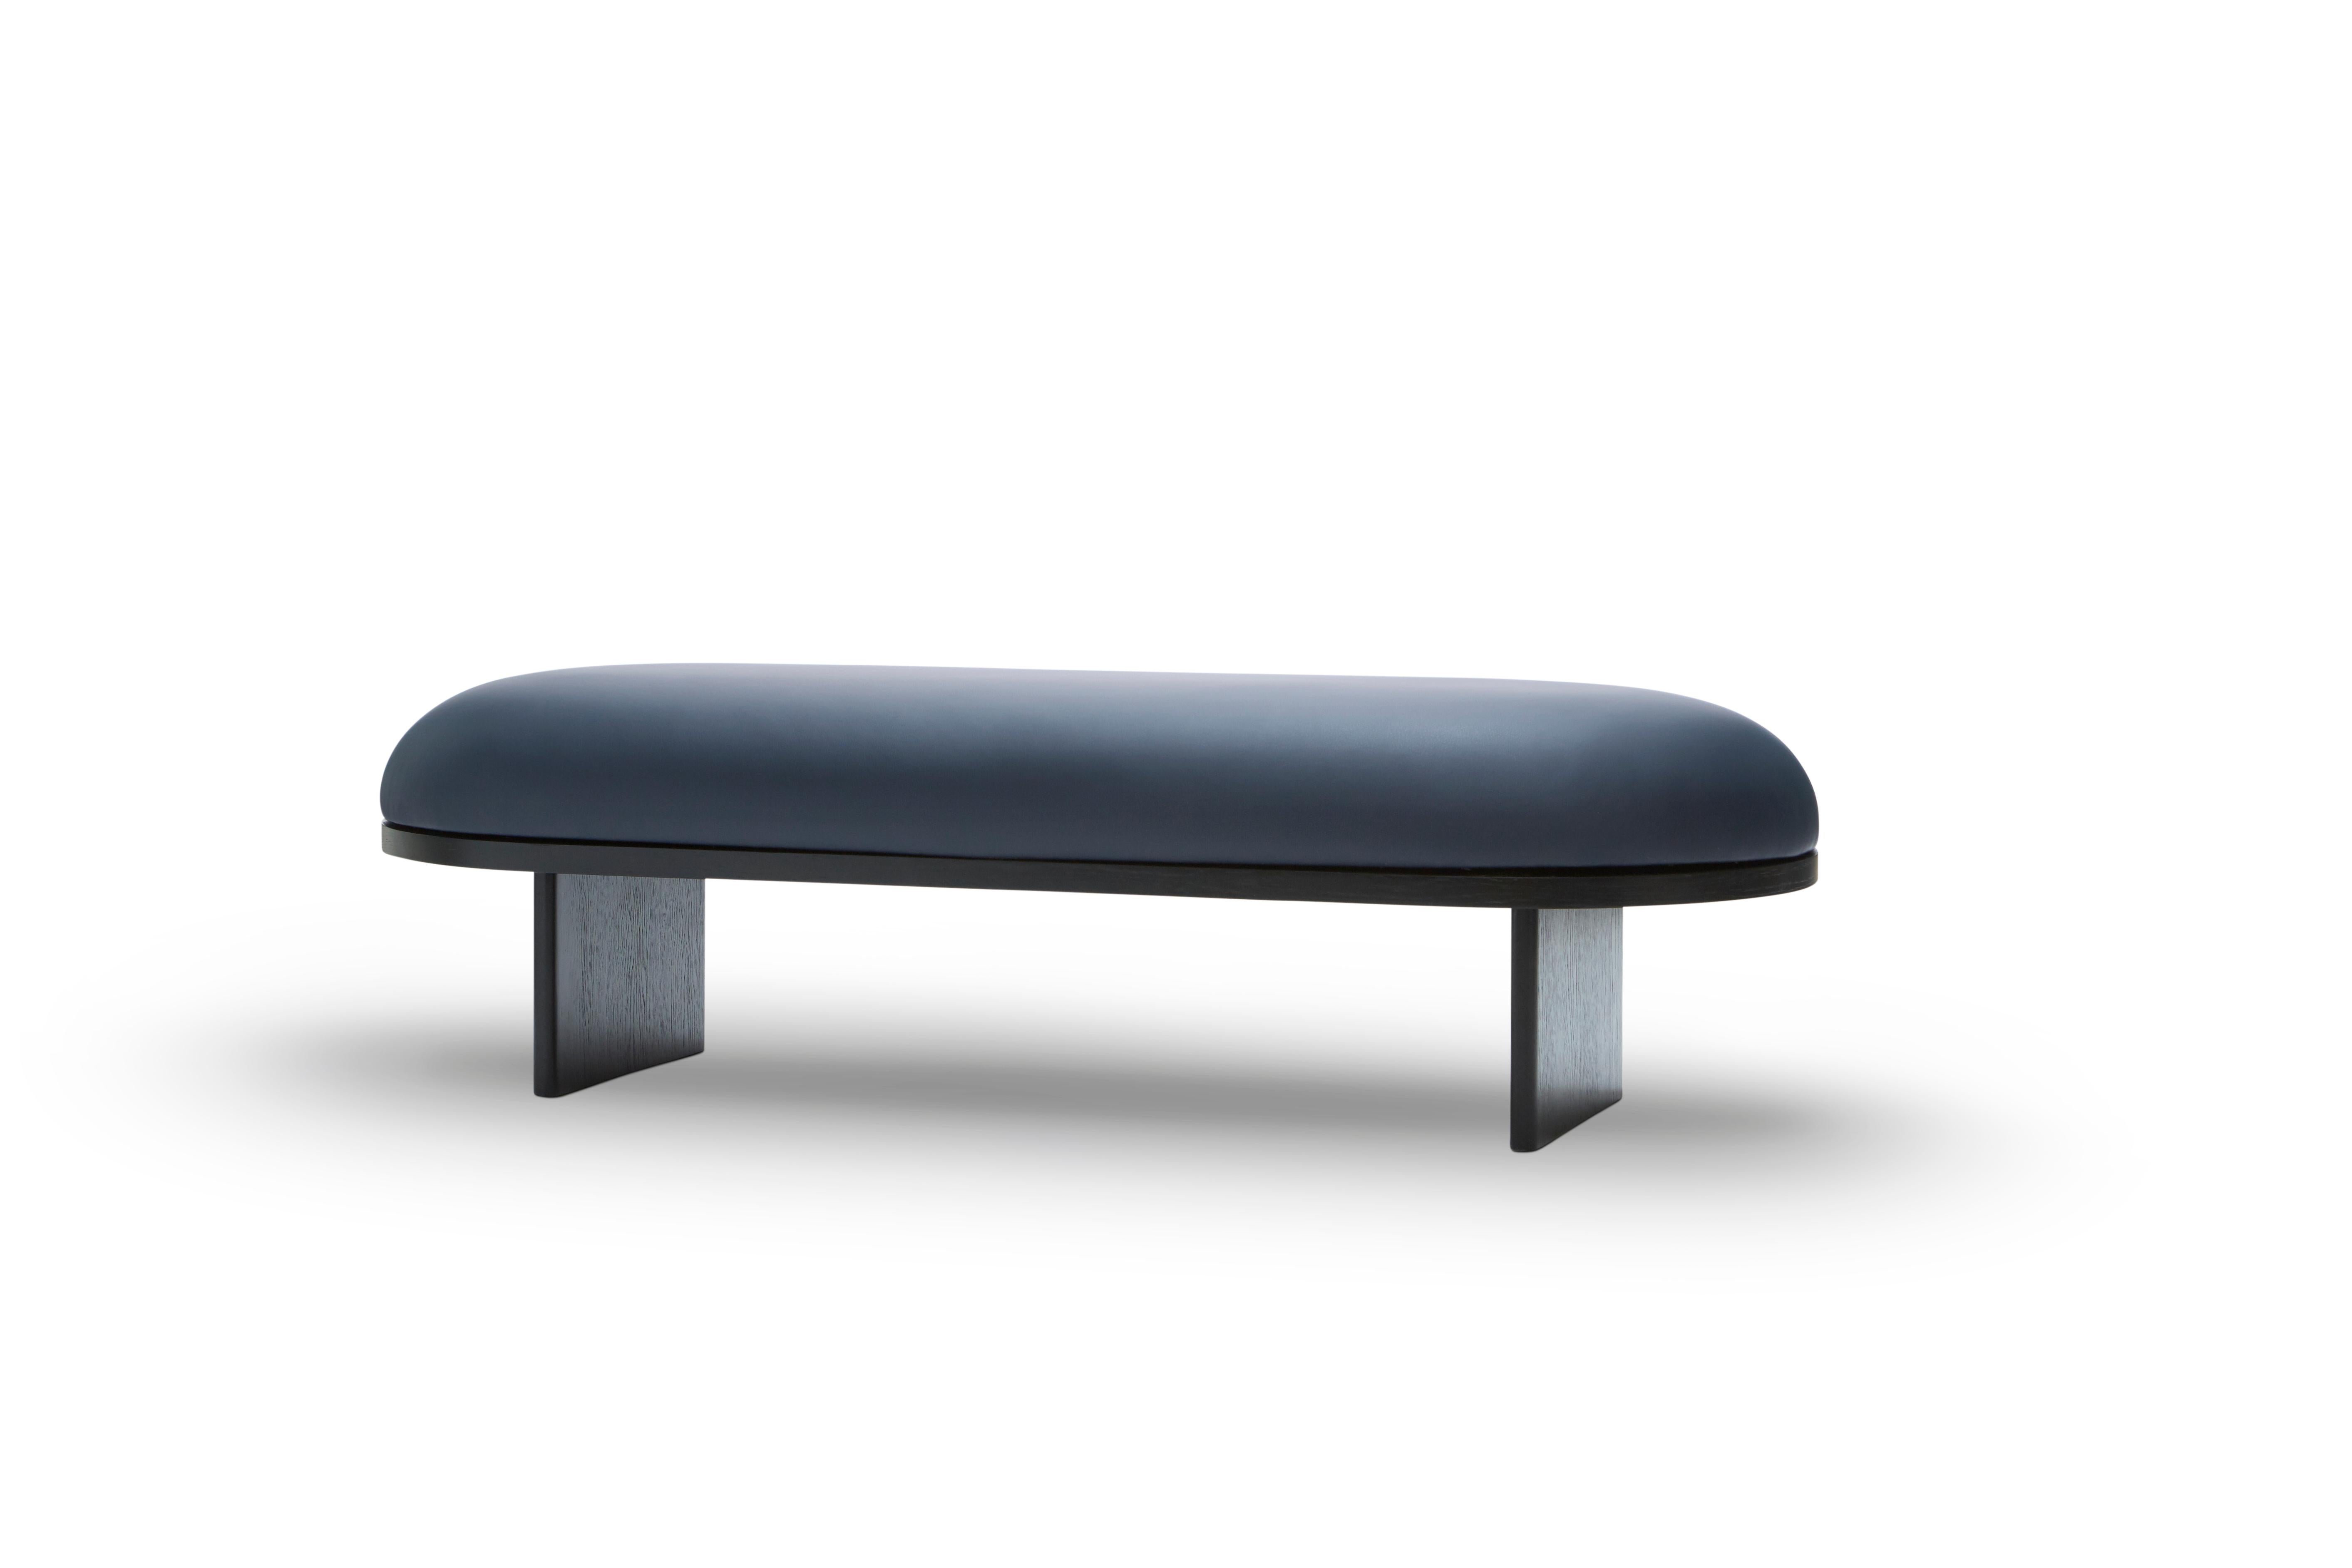 En vente : Black (Stained Black) Anza Large Upholstered Bench with Floating Cushion (Banc tapissé avec coussin flottant) 2